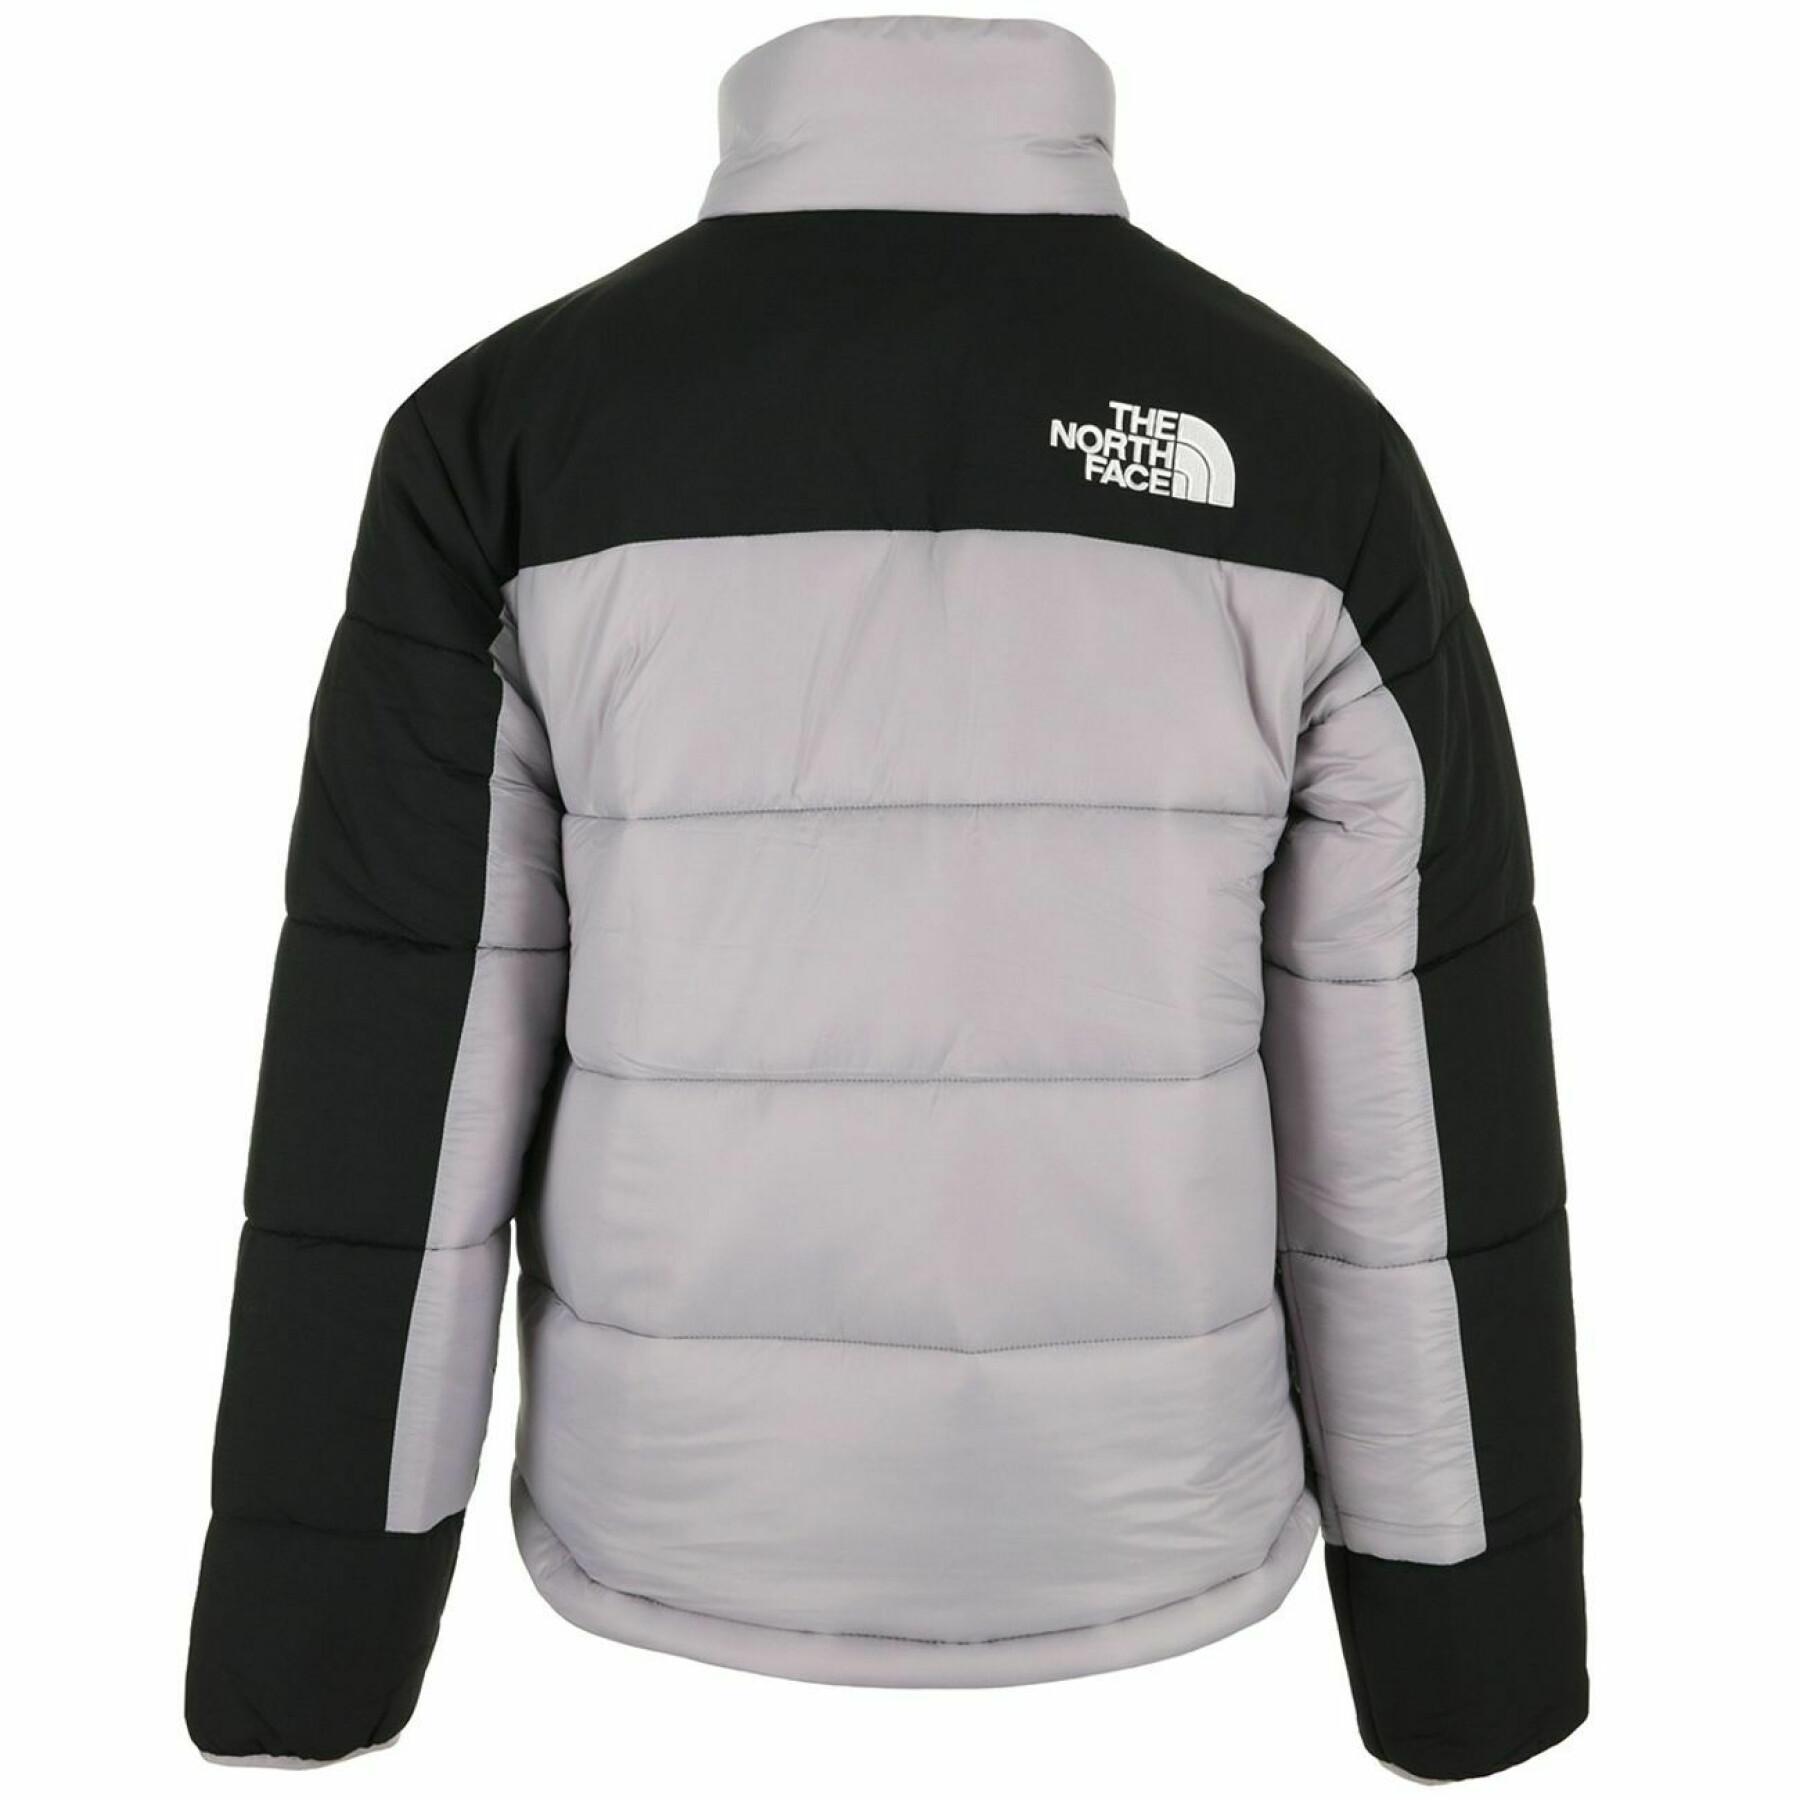 Jaqueta de mulher The North Face Hmlyn Insulated